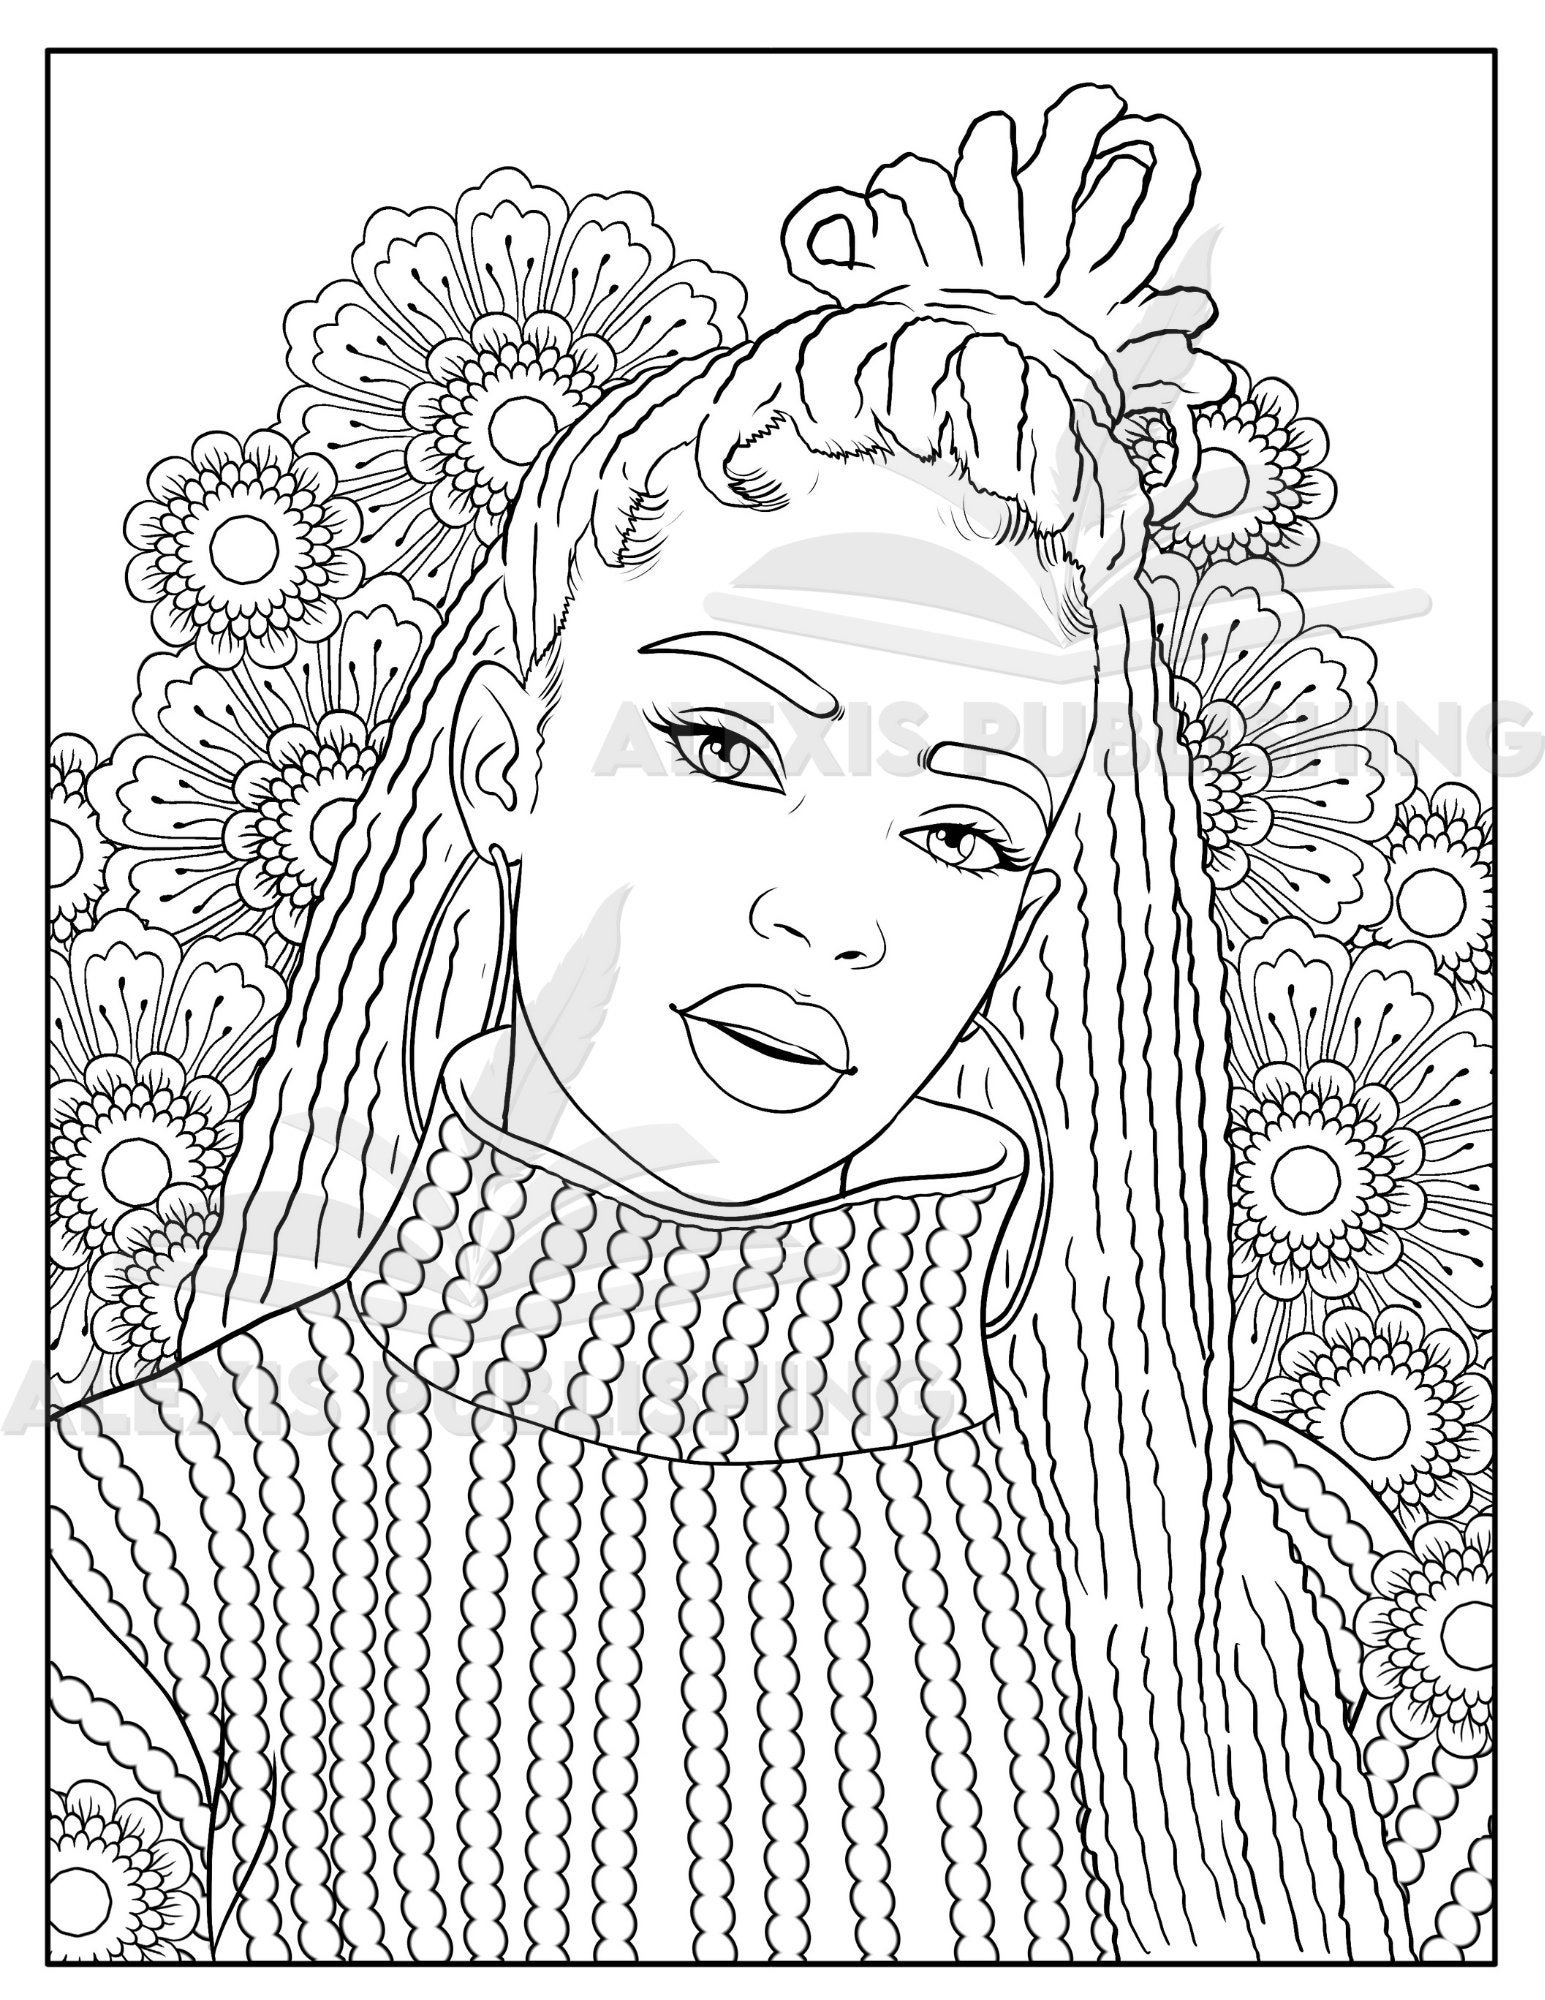 African American Adult Coloring Book for Women, Black Girl Coloring Book, Coloring  Books, Black Artists, Christmas Gifts for Black Women 